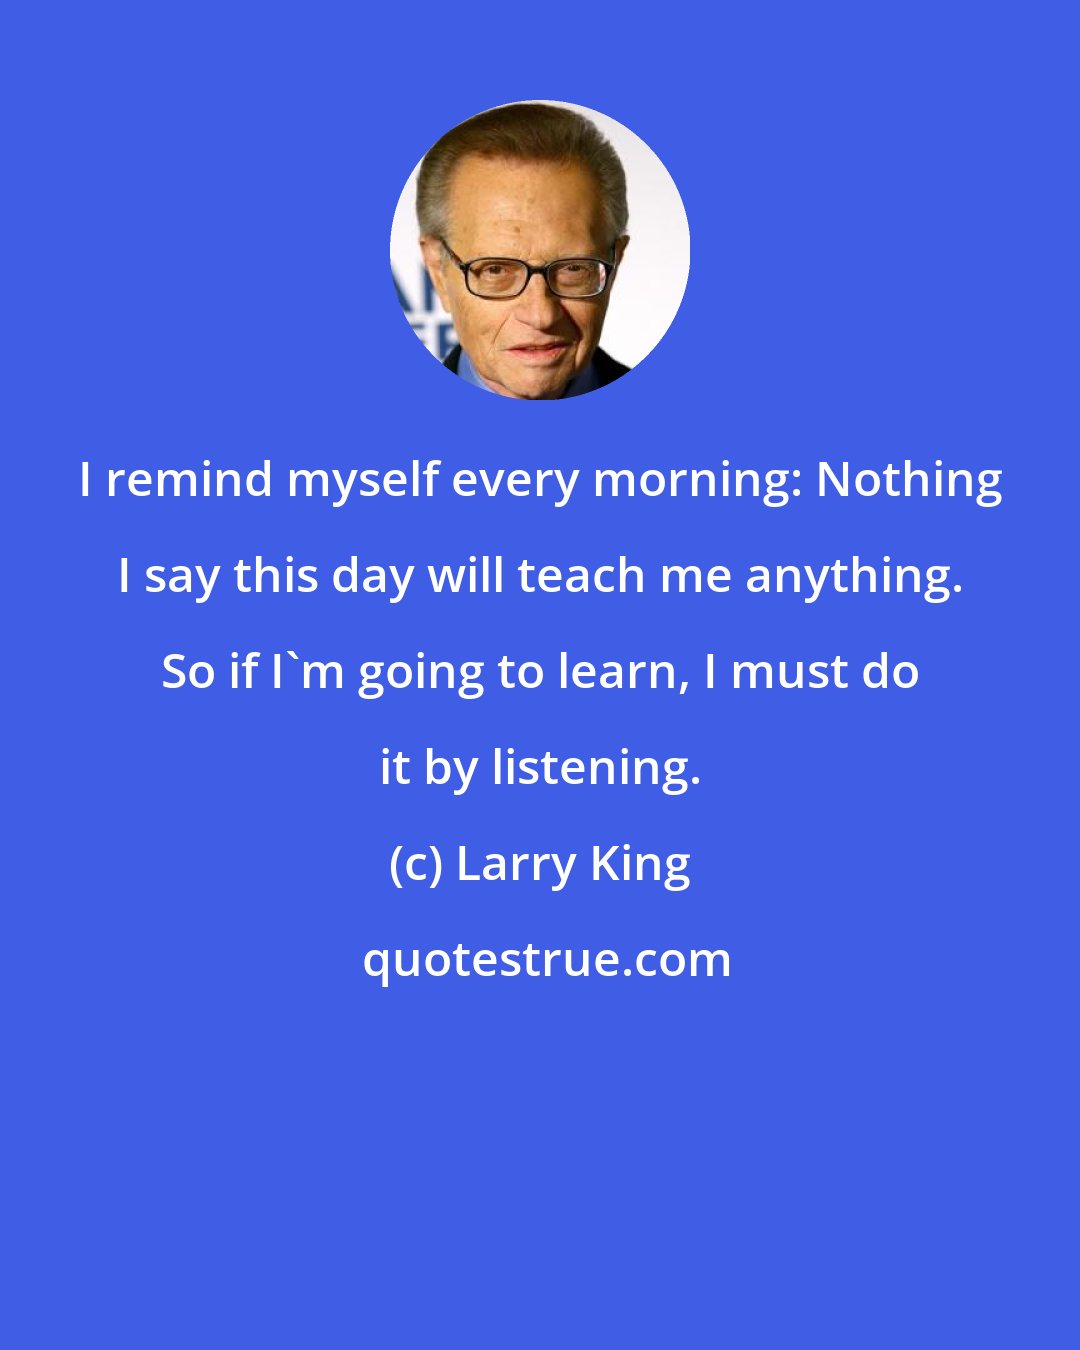 Larry King: I remind myself every morning: Nothing I say this day will teach me anything. So if I'm going to learn, I must do it by listening.